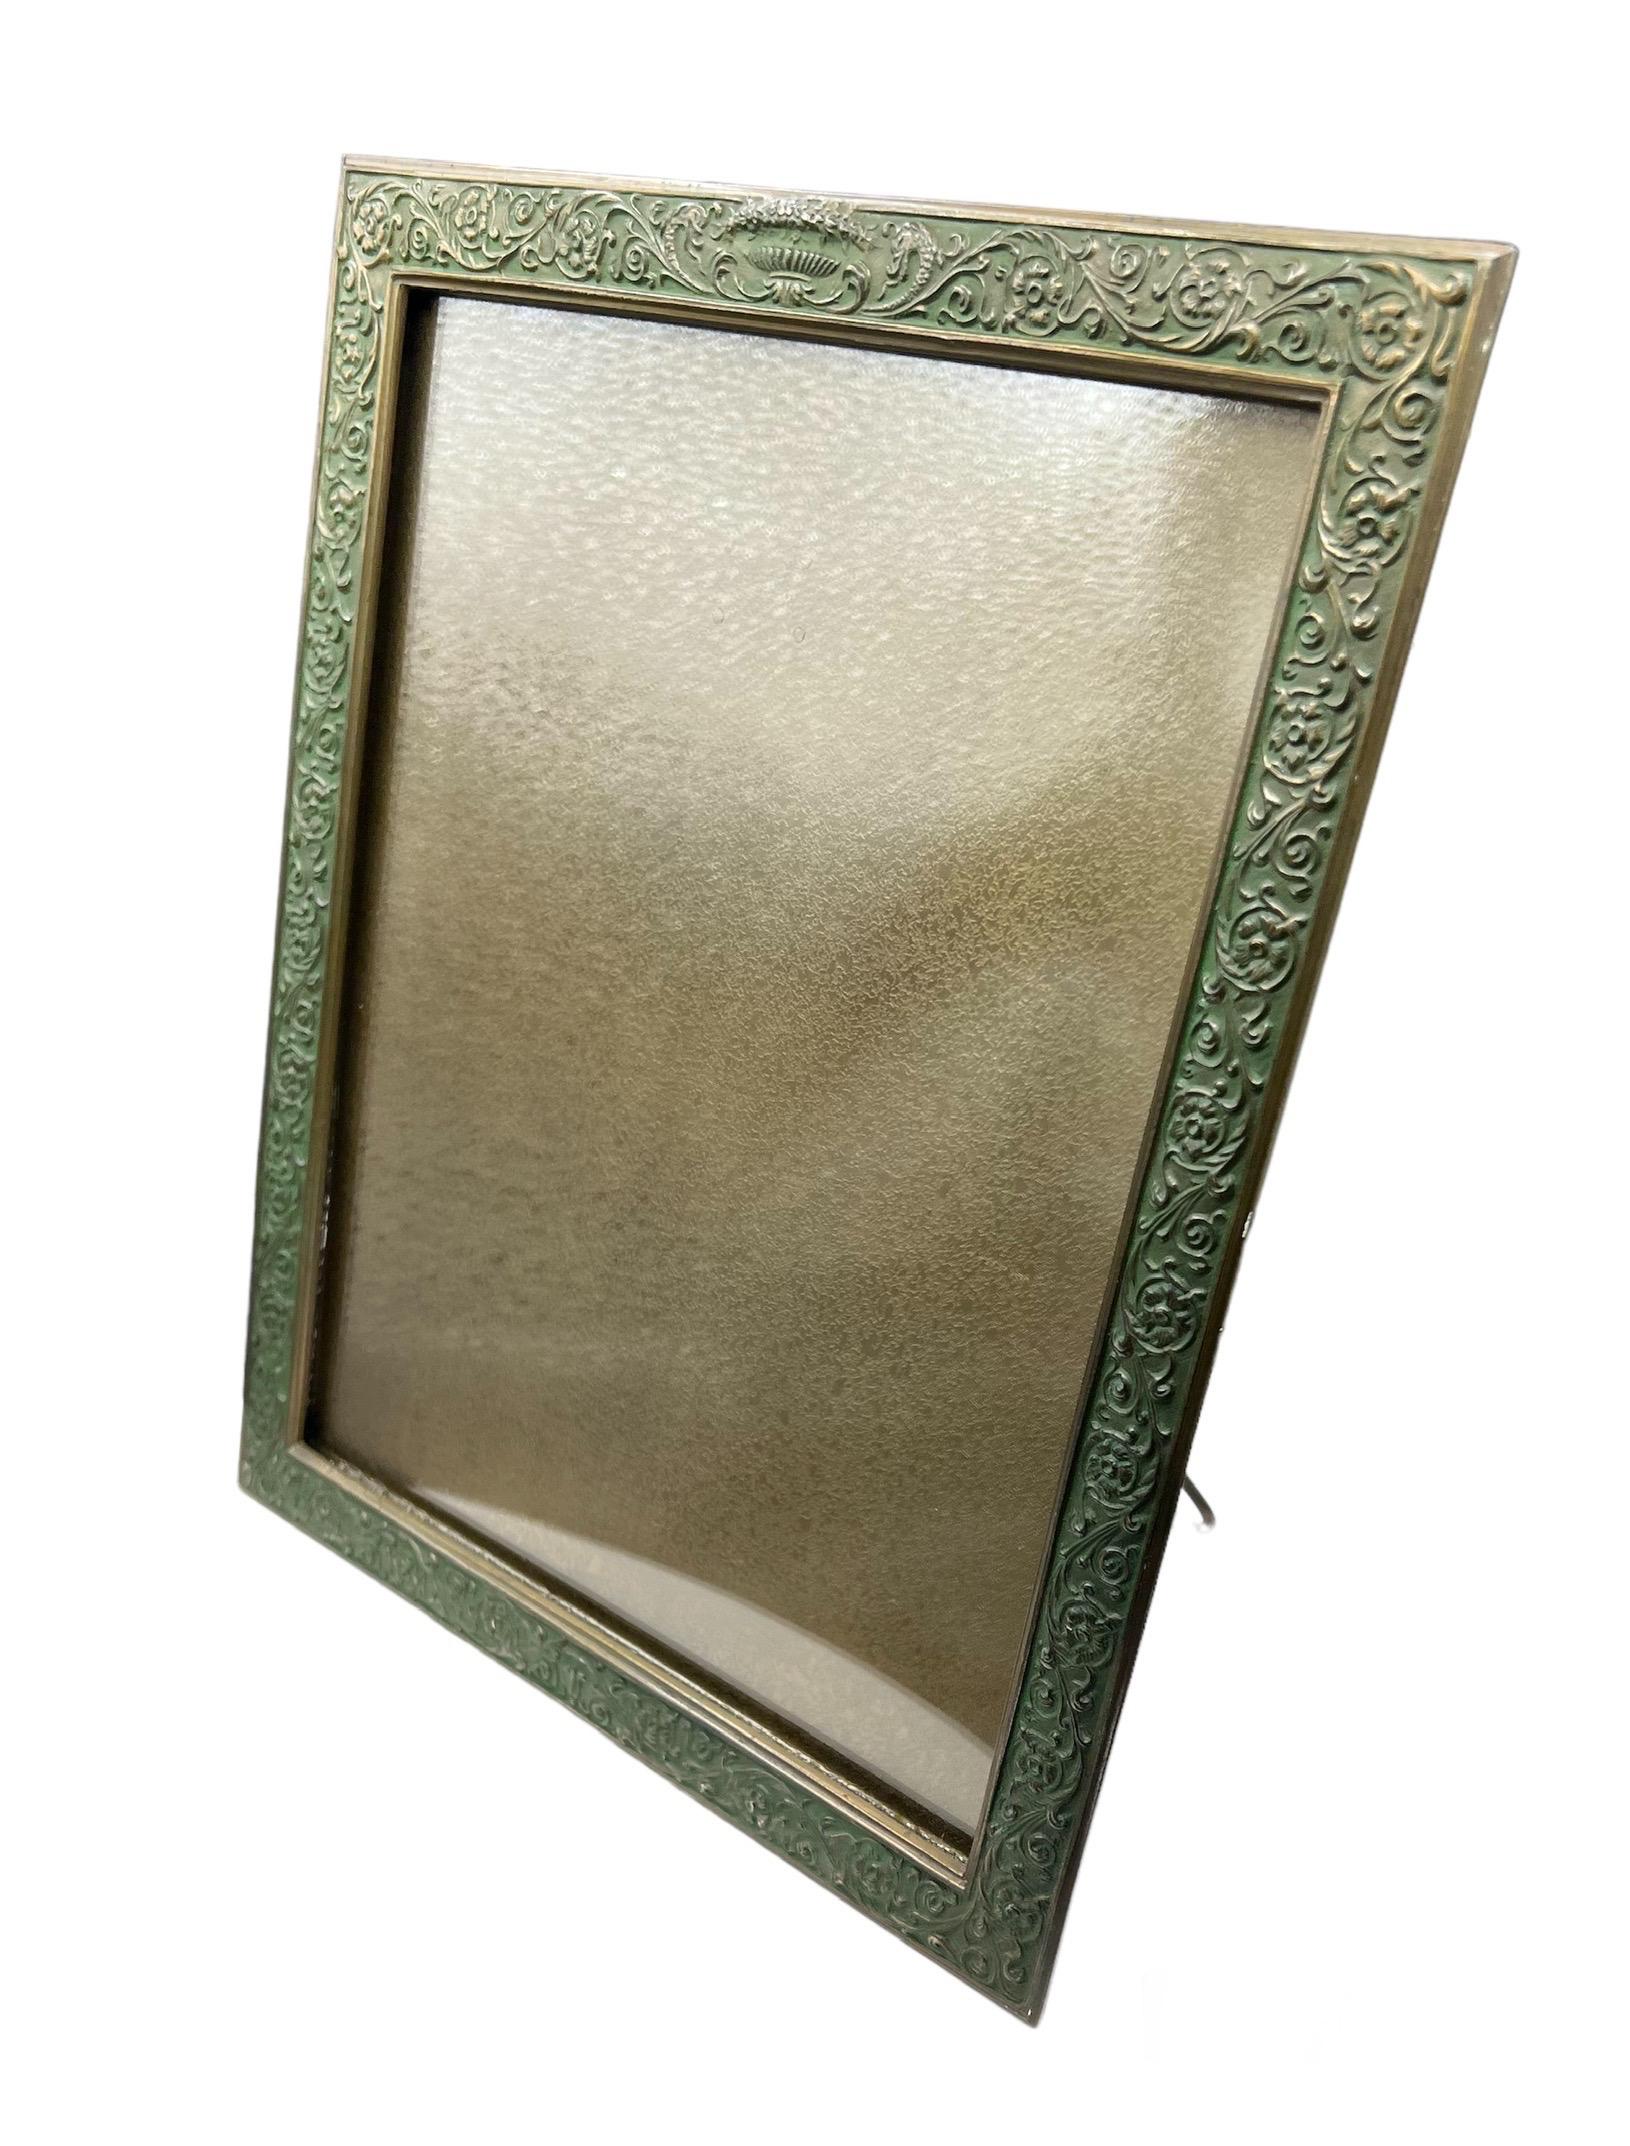 This Tiffany Studios gilt-bronze picture frame, 
Stamped Tiffany Studios / NY / 1611.  In the 